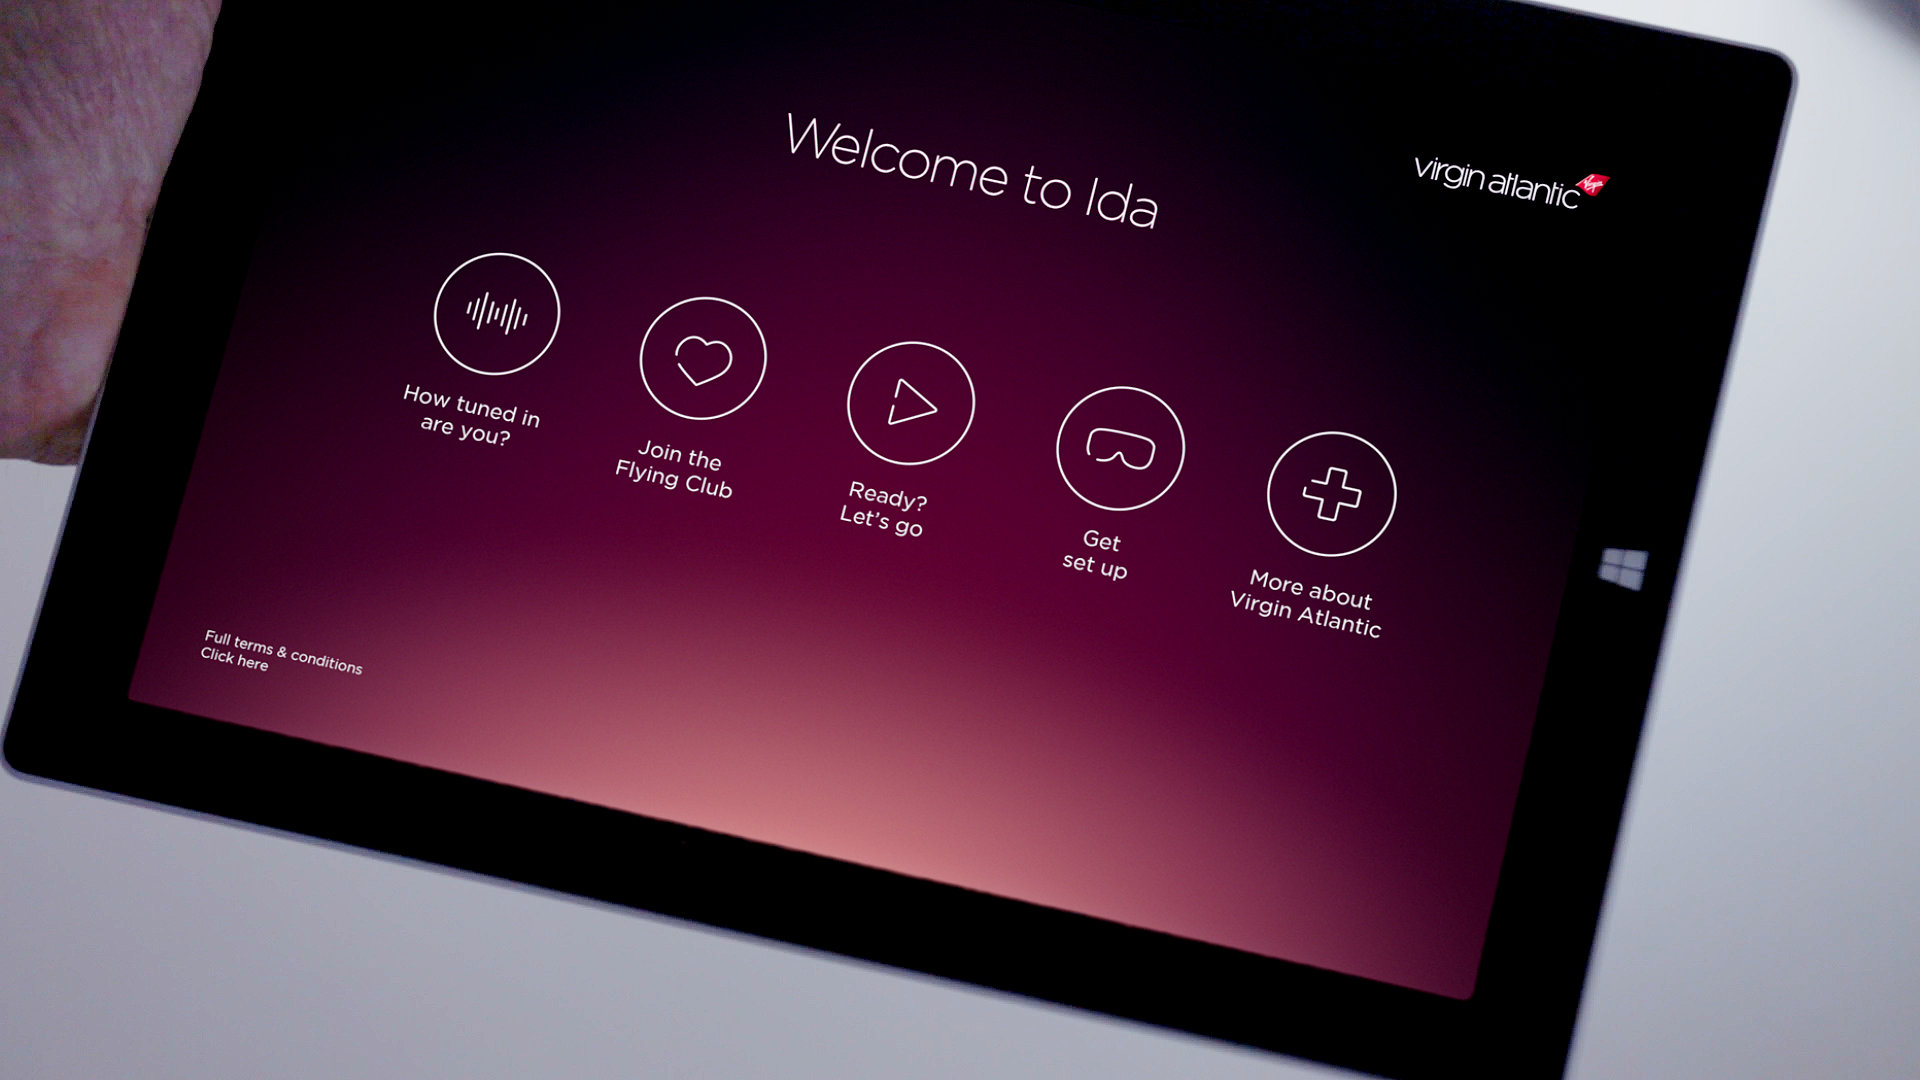 Virgin Atlantic’s Windows 10 Ida app, home screen pictured, allows the viewer to go on an interactive digital adventure and experience what it’s like to be in upper class on an actual flight.